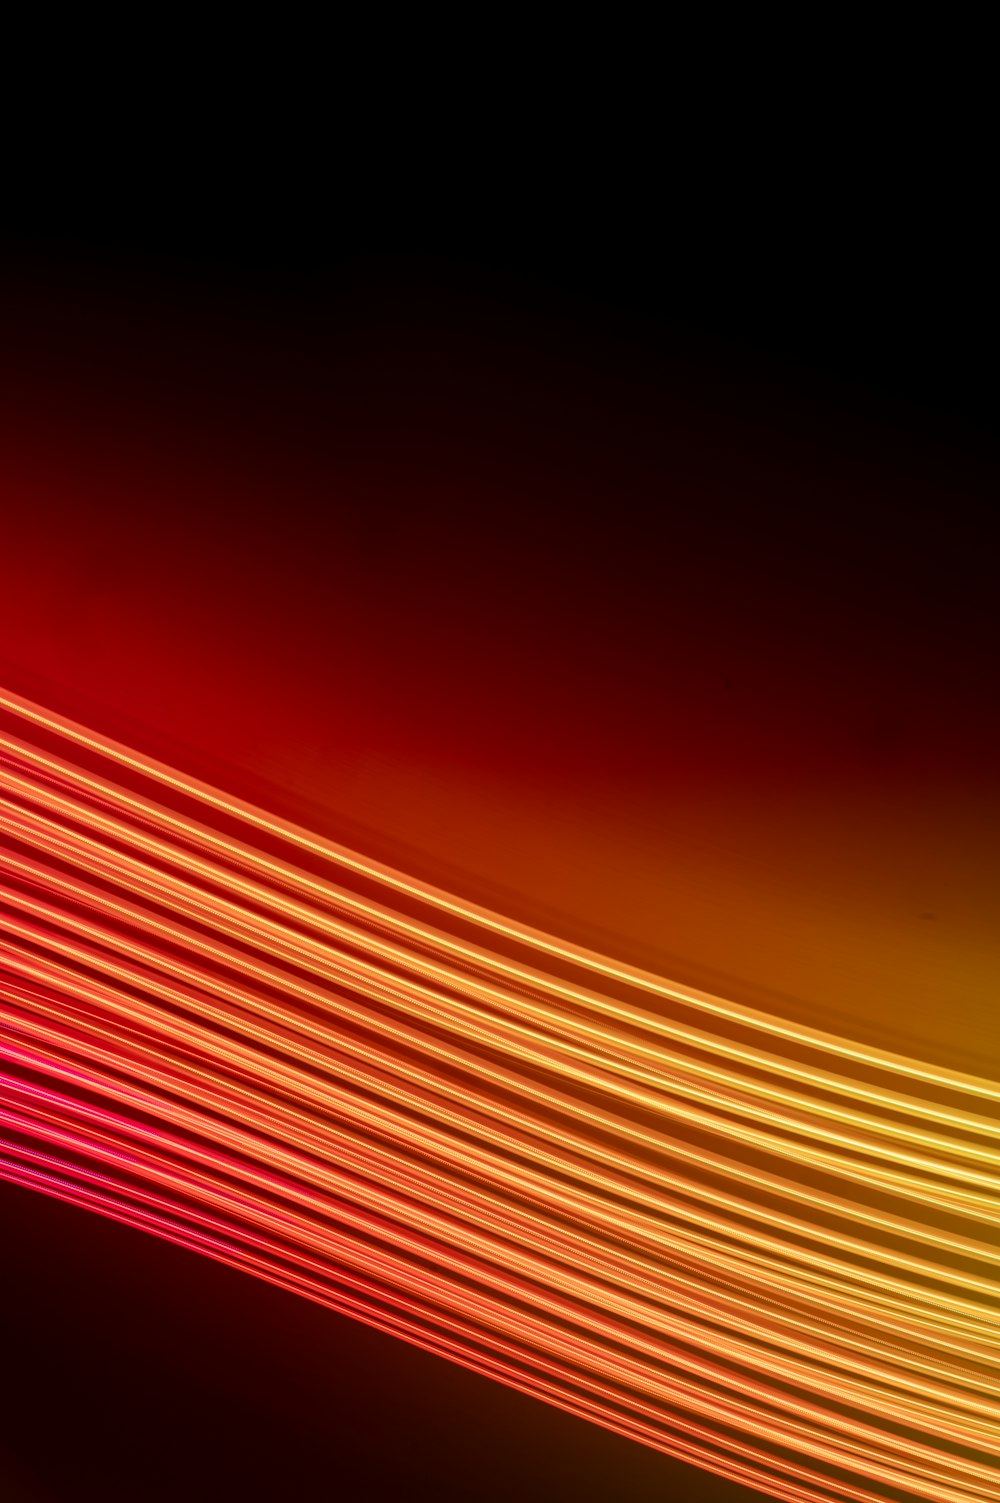 a red and yellow background with lines of light